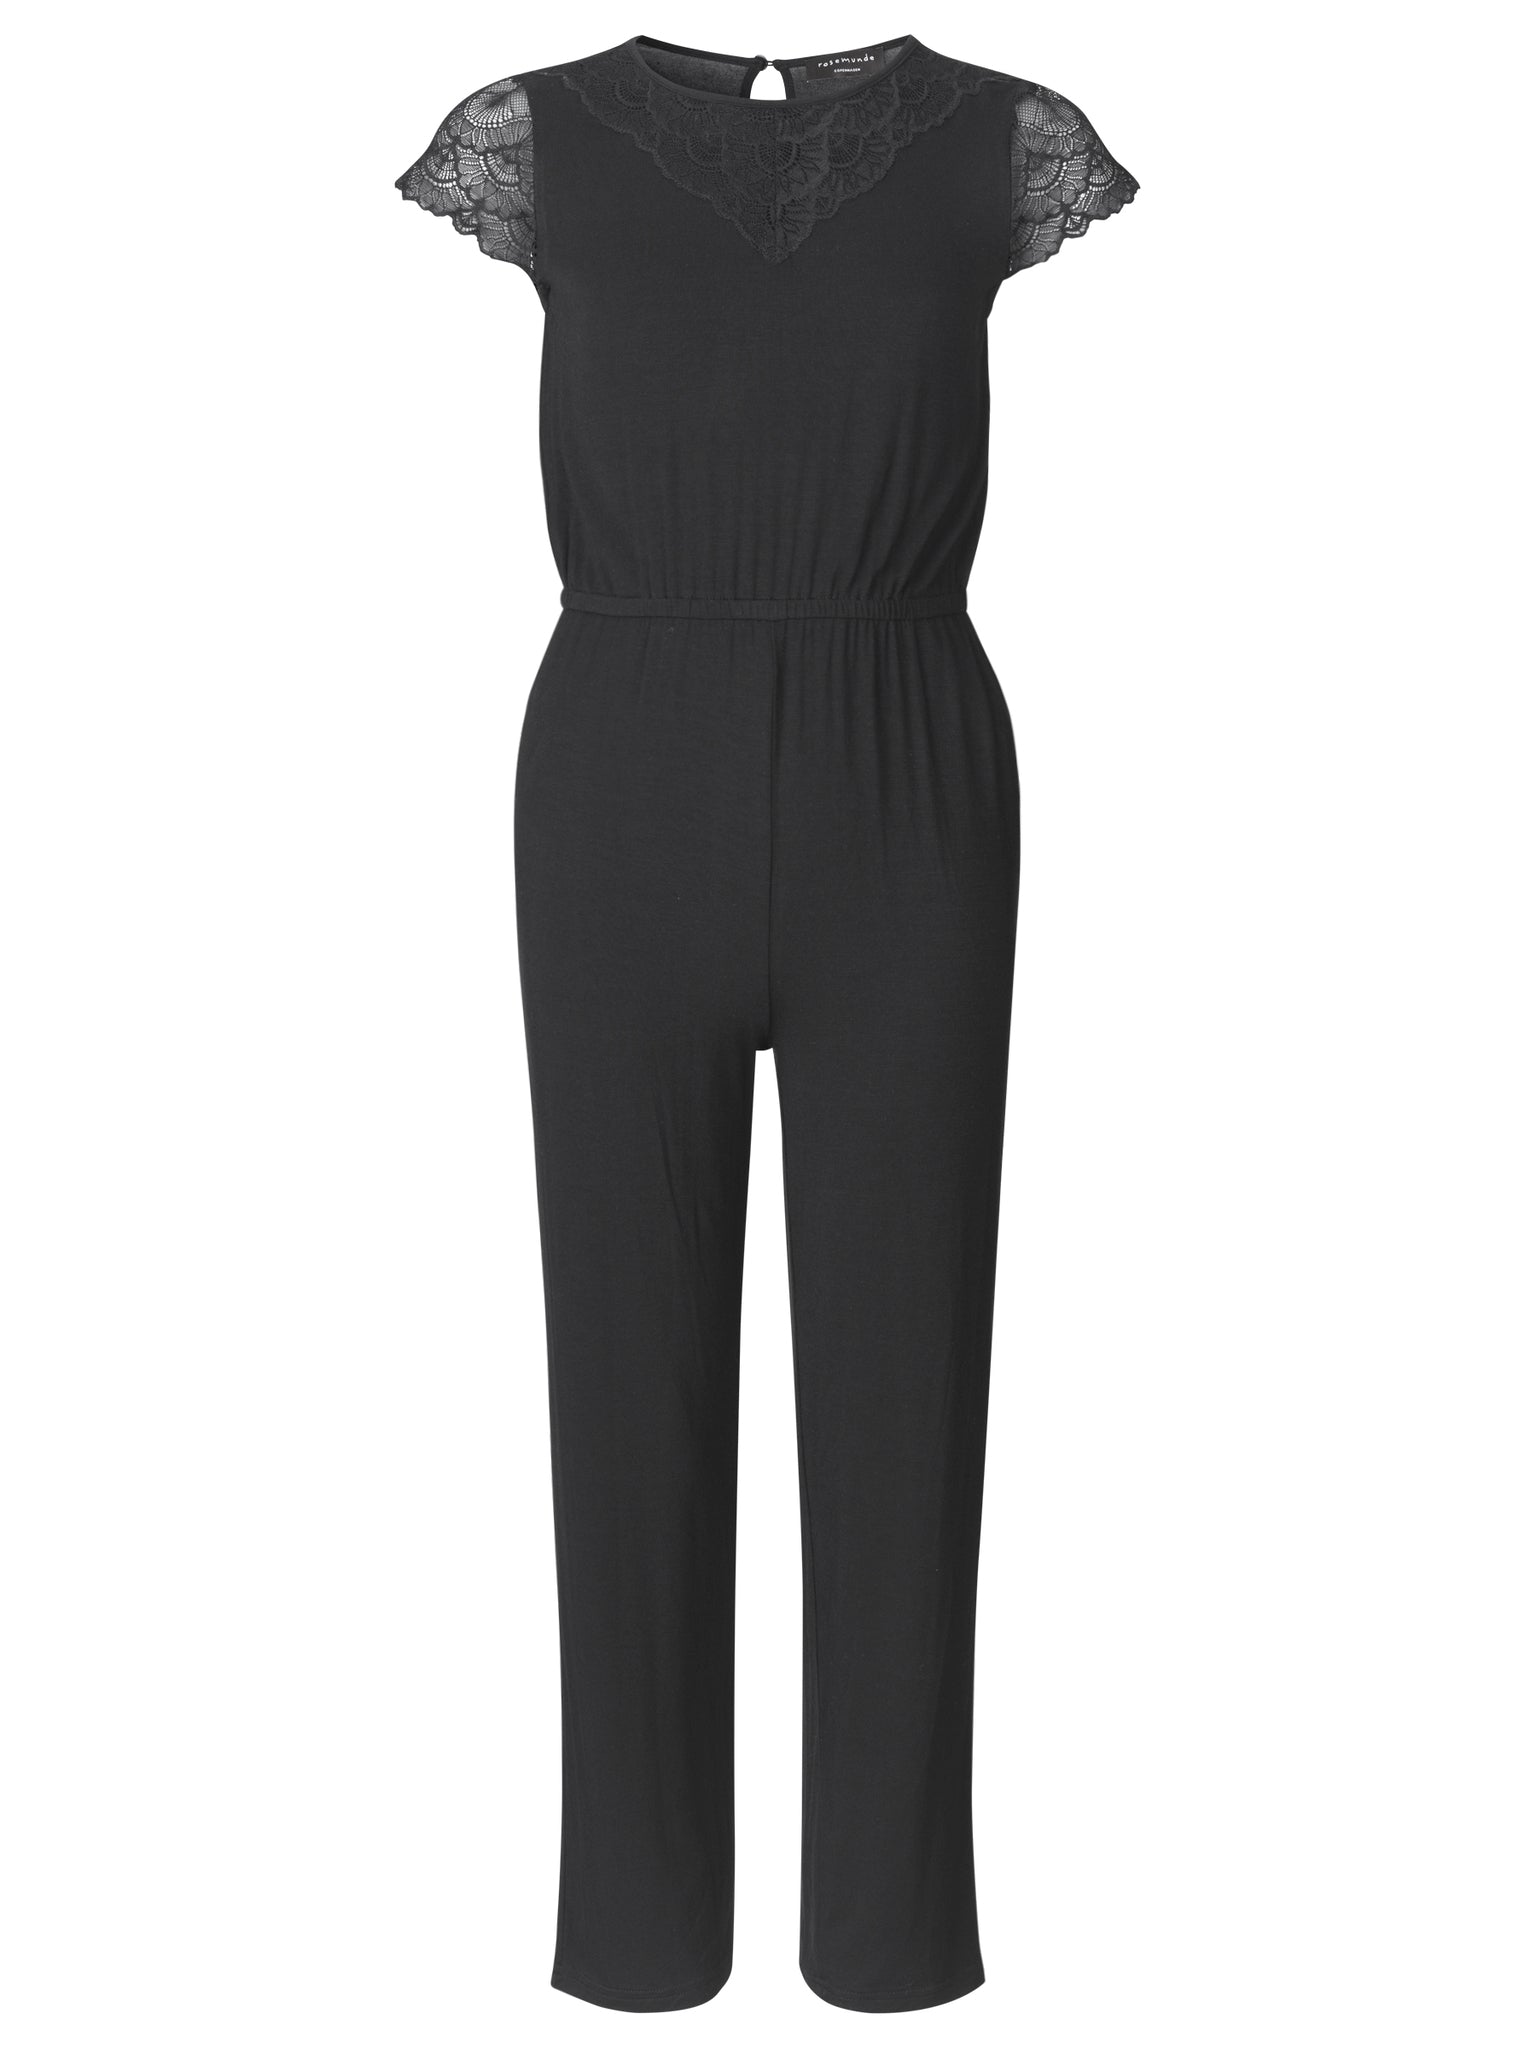 Jumpsuit for girls